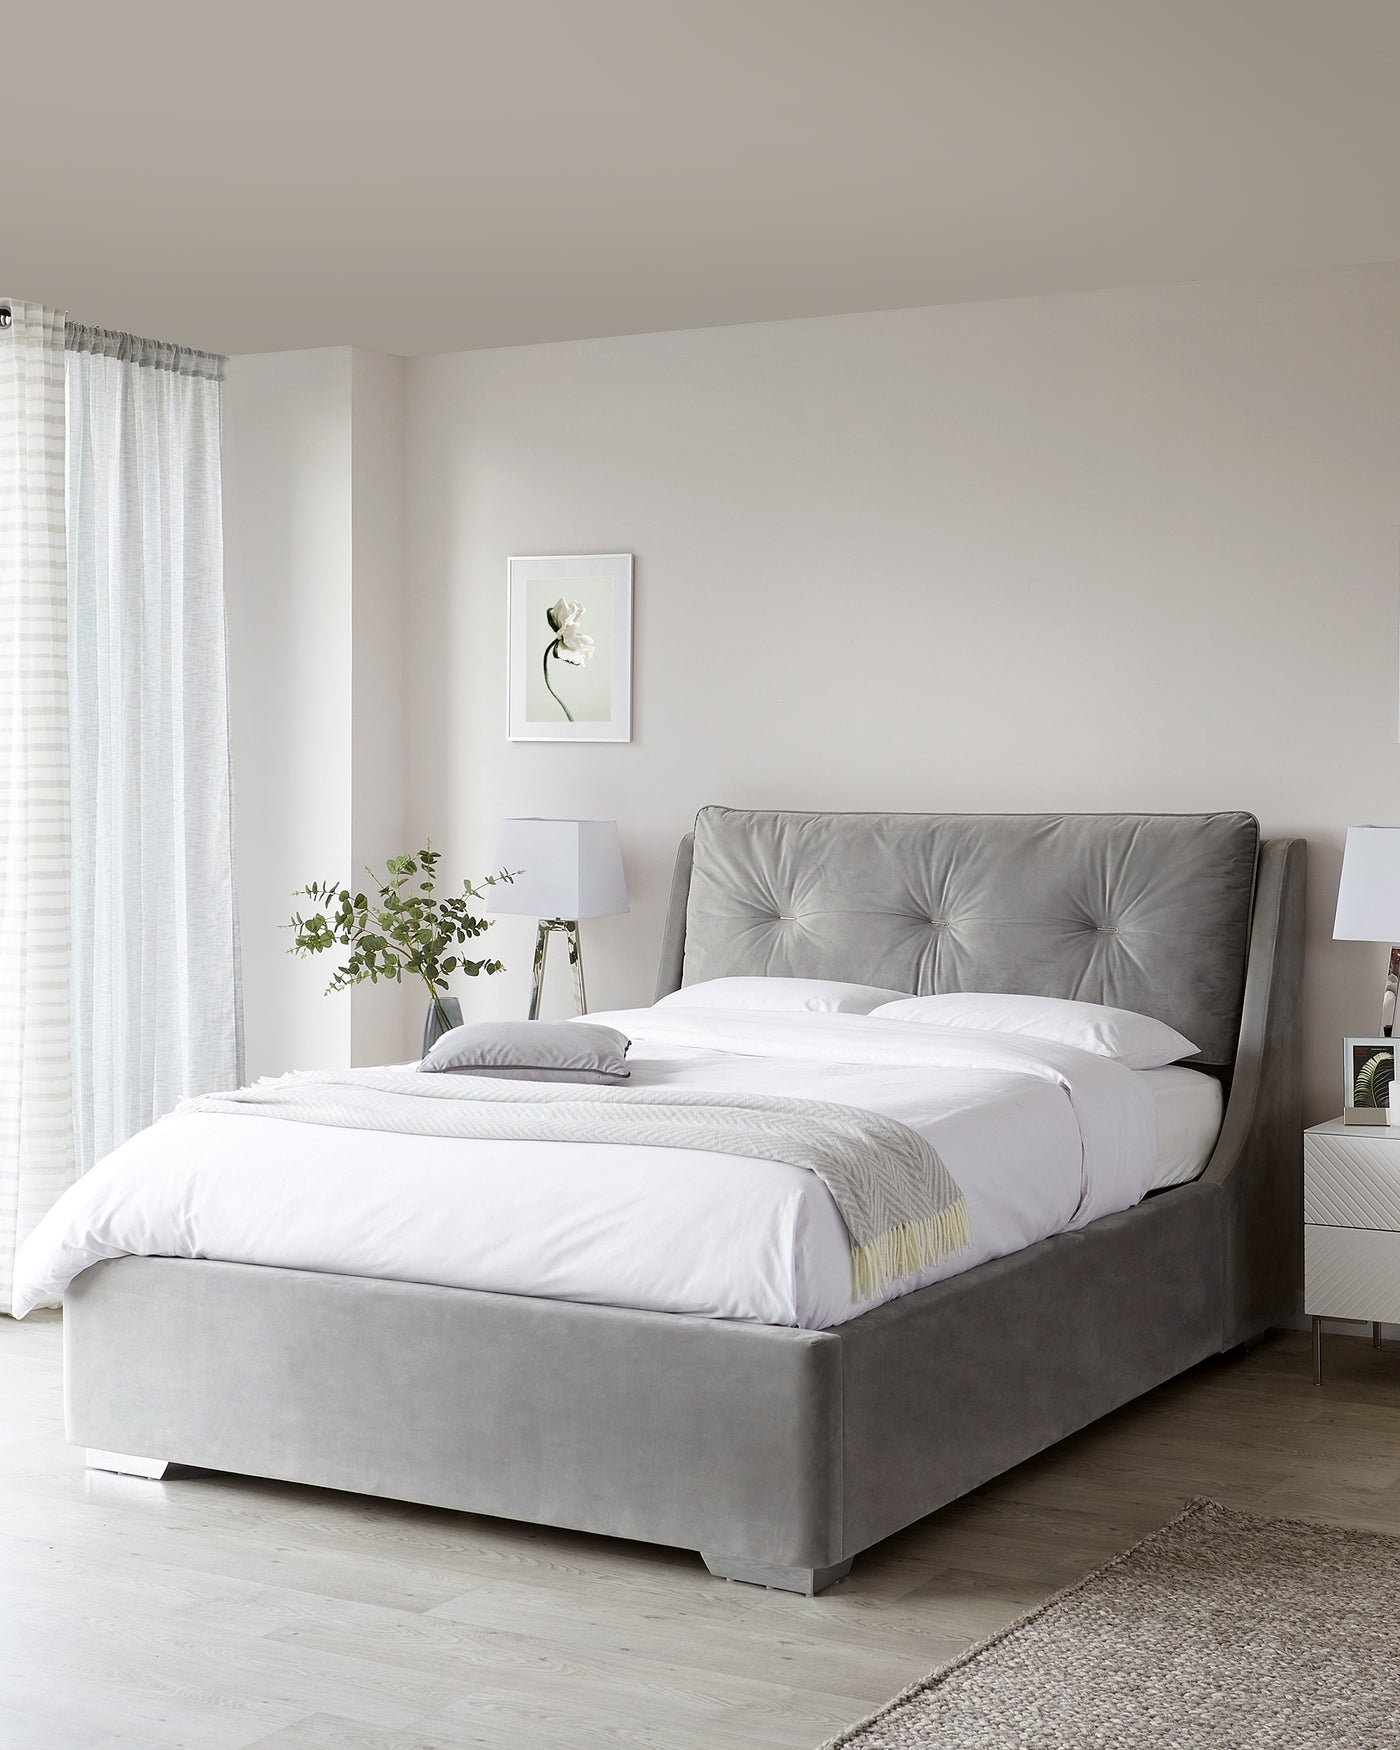 Elegant grey upholstered bed with tufted headboard and matching bed frame, complemented by white bedding and a light grey throw at the foot of the bed.